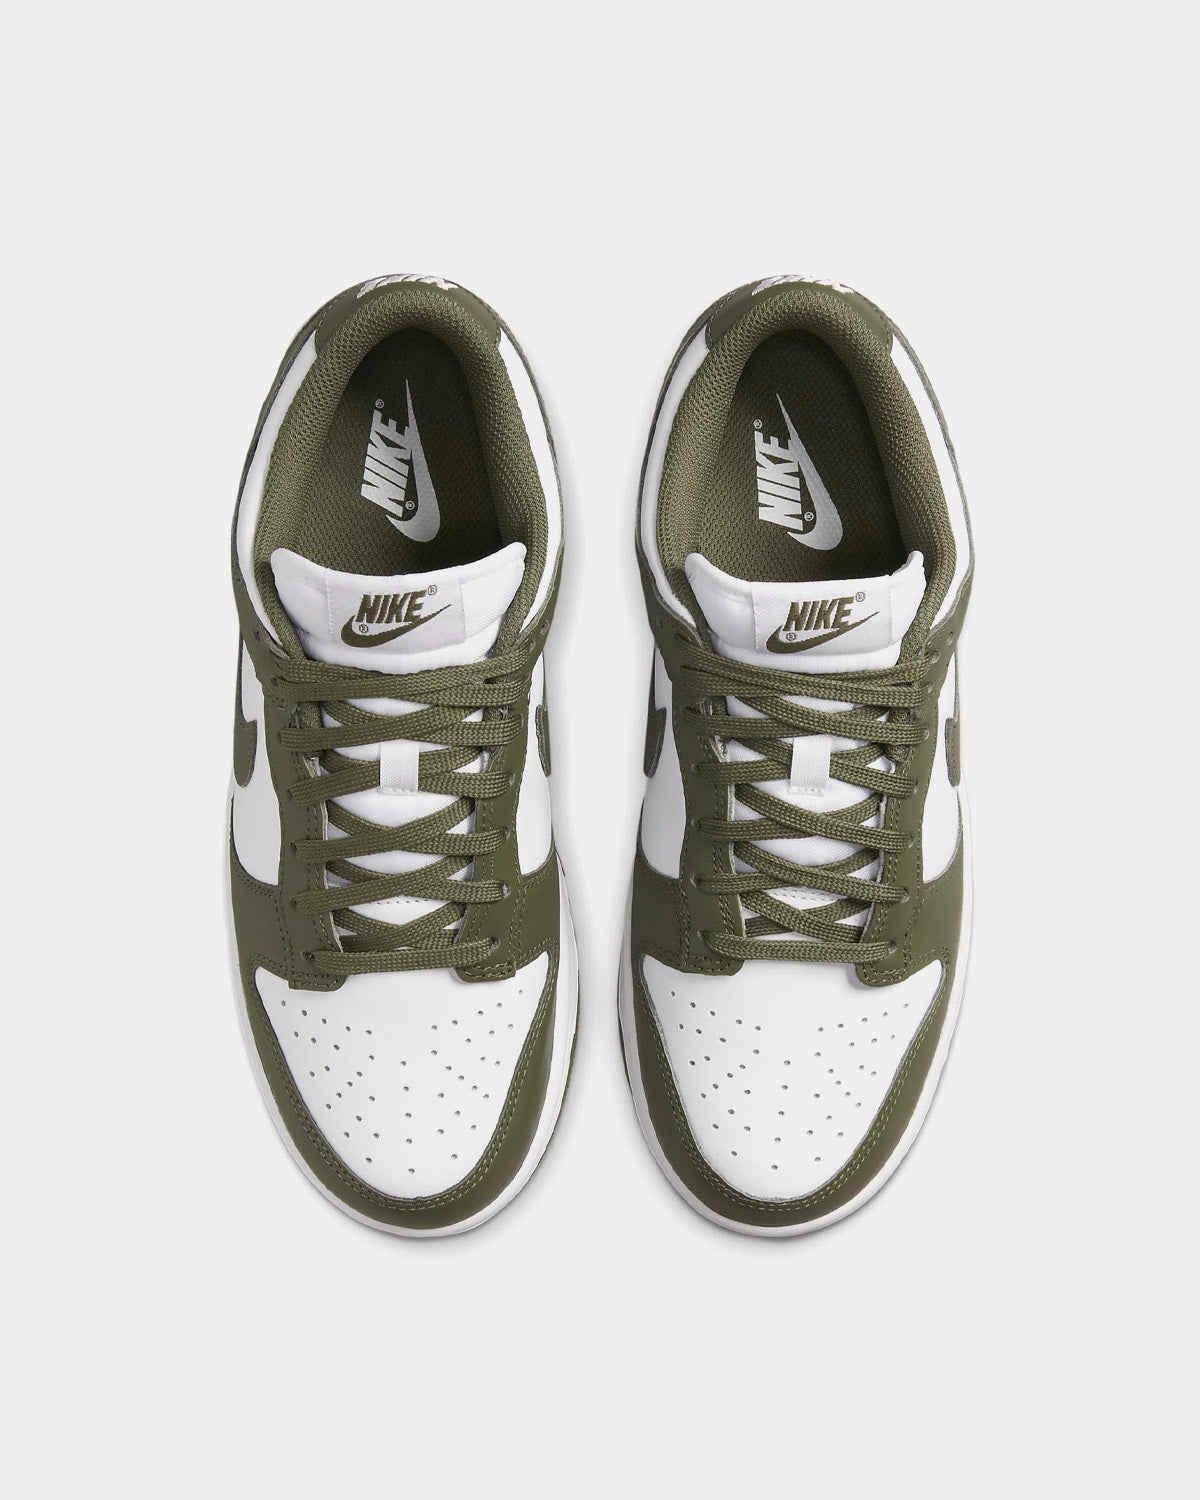 Nike - Dunk Low White / White / Medium Olive Low Top Sneakers